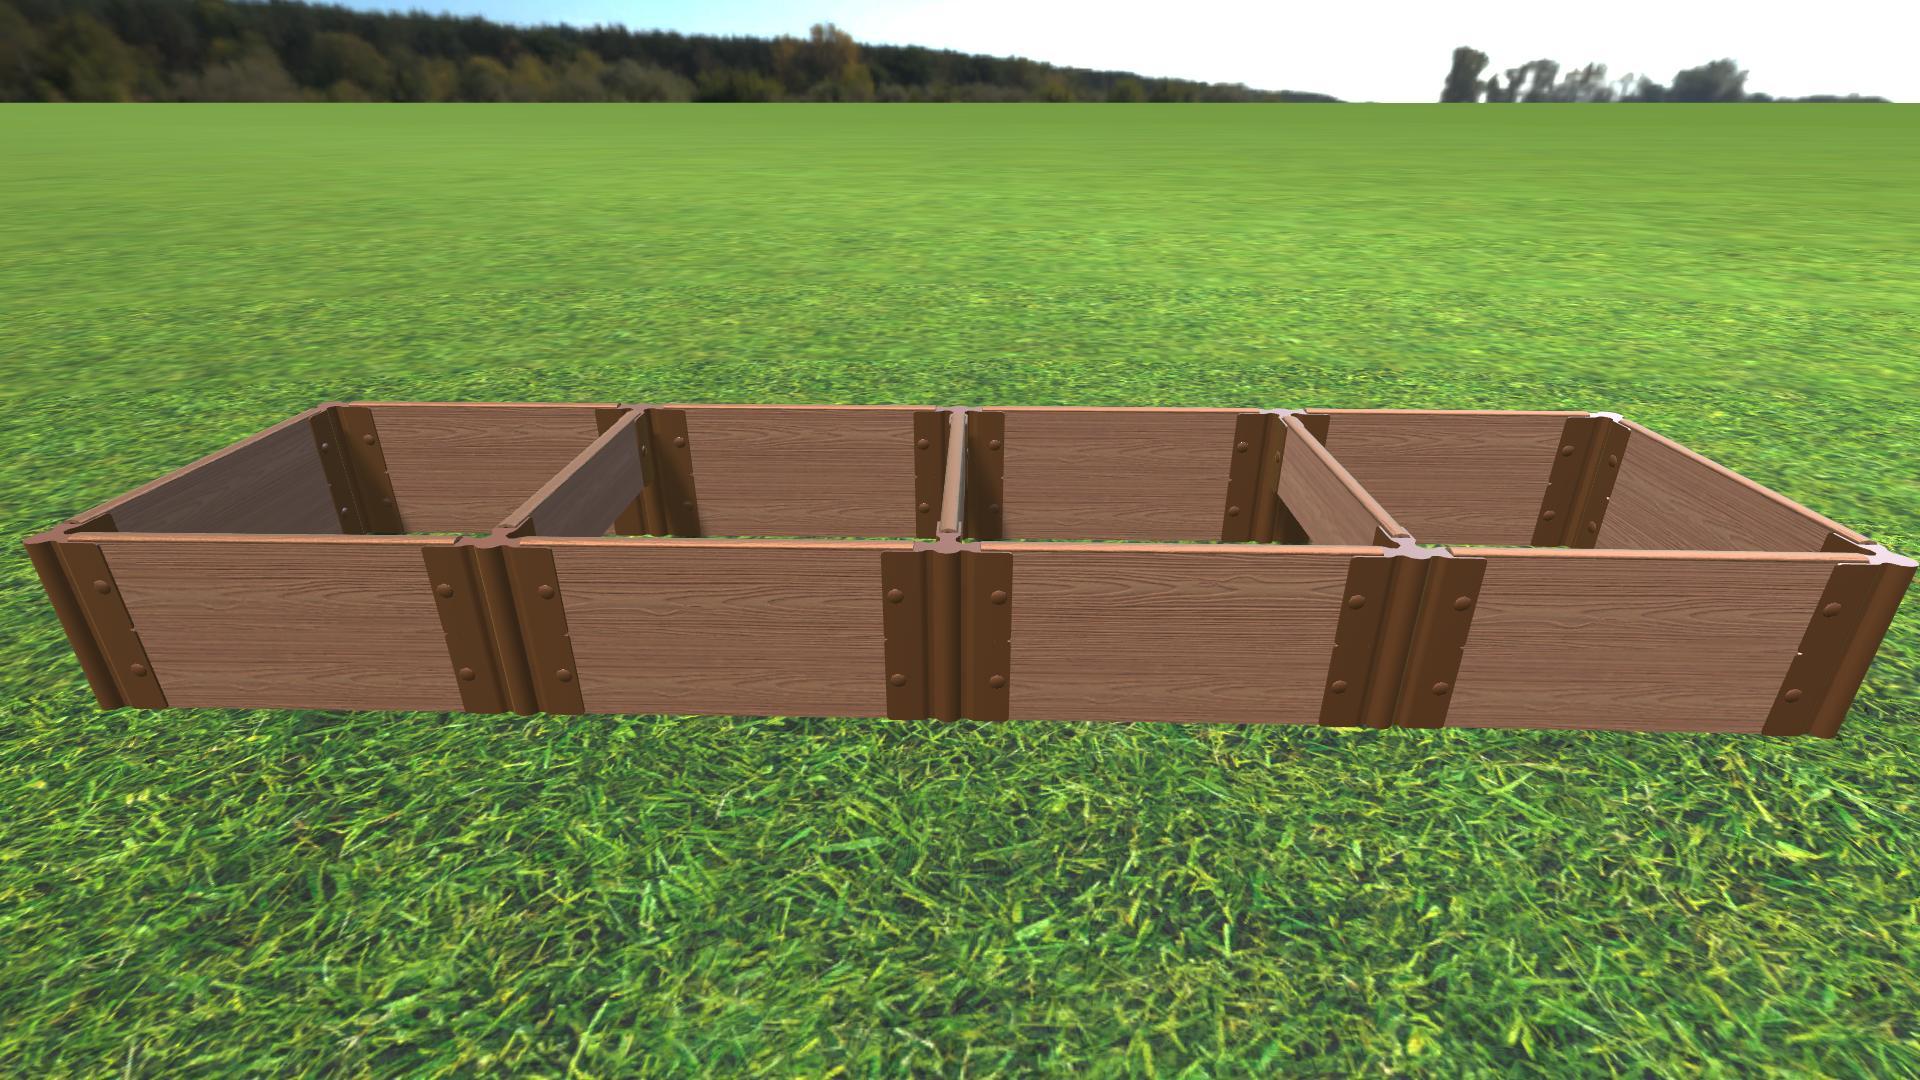 2' x 8' Raised Garden Bed (2' Sections) Raised Bed Planters Frame It All Classic Sienna 1'' 2 = 11"